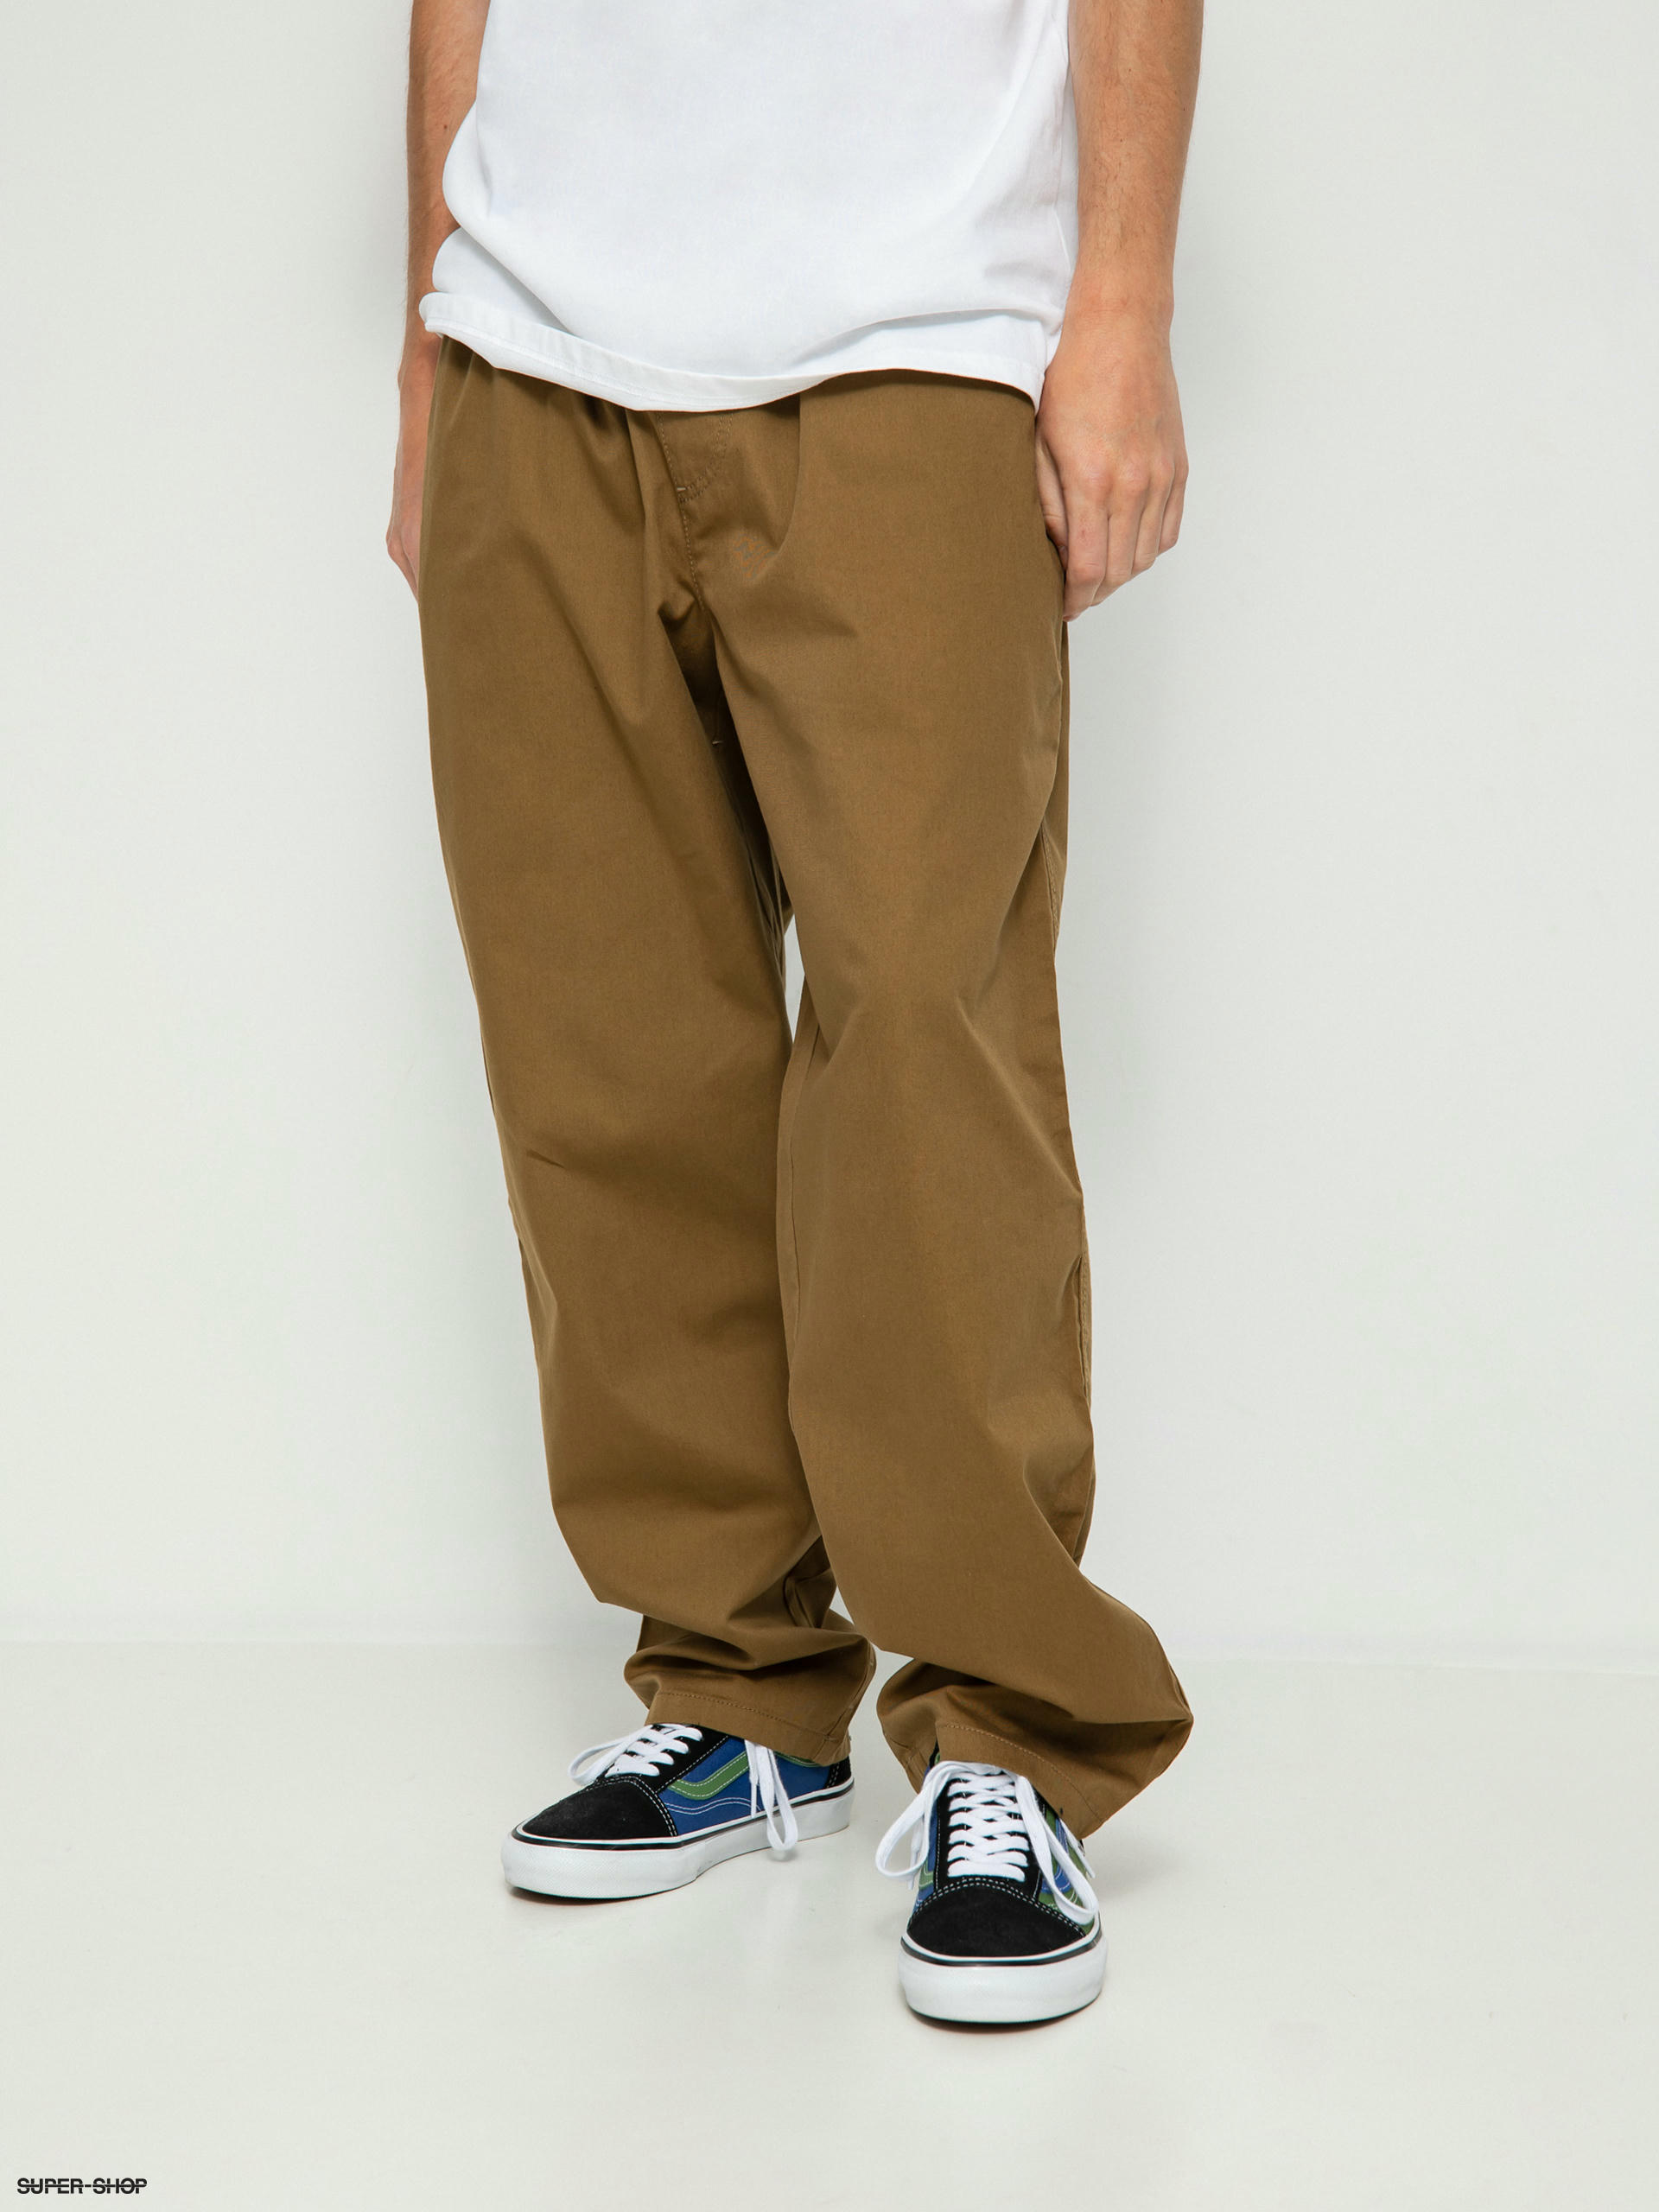 Polar Skate Co  Surf Pants  HBX  Globally Curated Fashion and Lifestyle  by Hypebeast